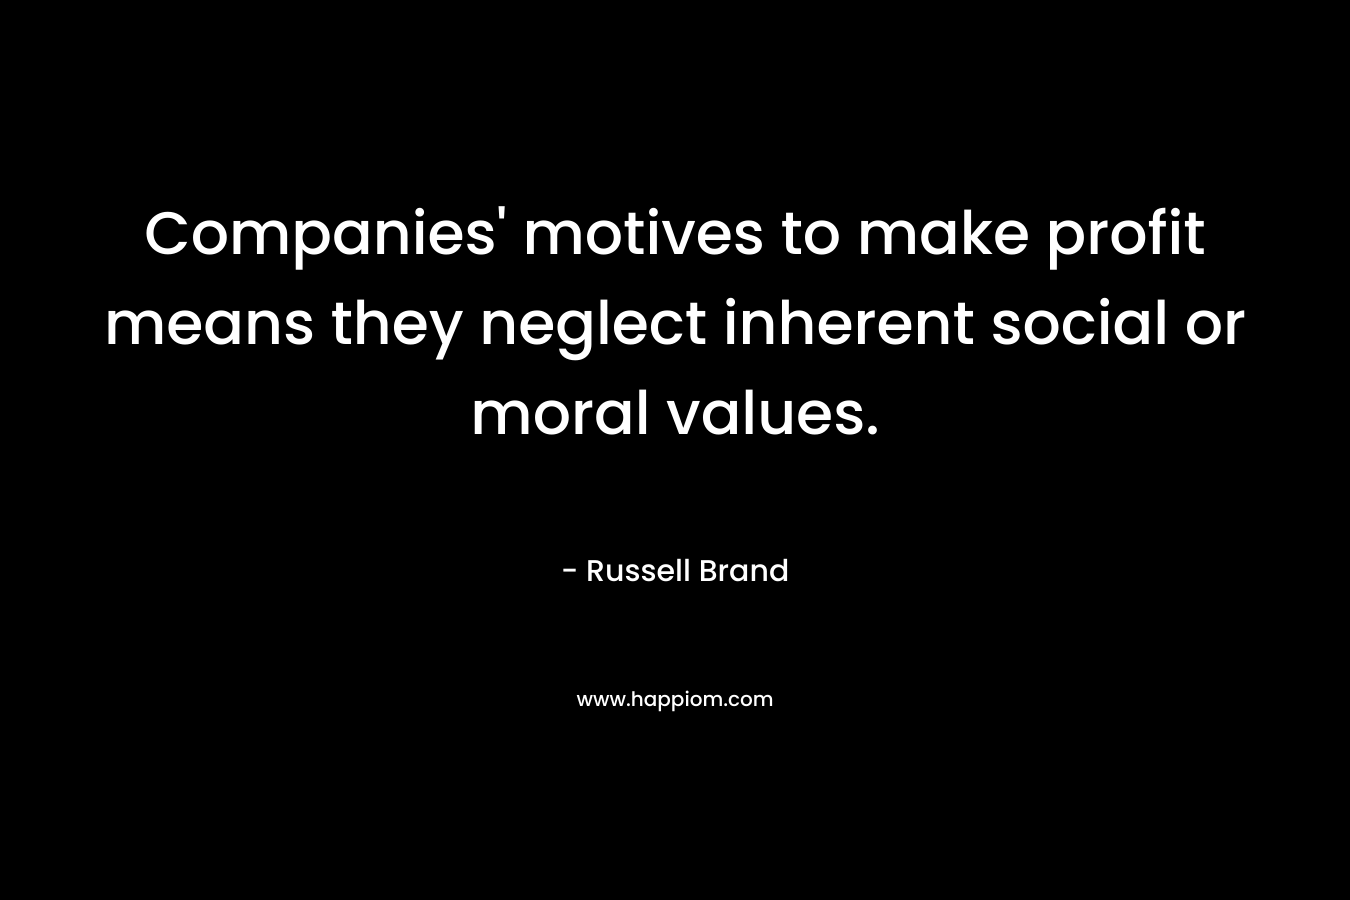 Companies’ motives to make profit means they neglect inherent social or moral values. – Russell Brand